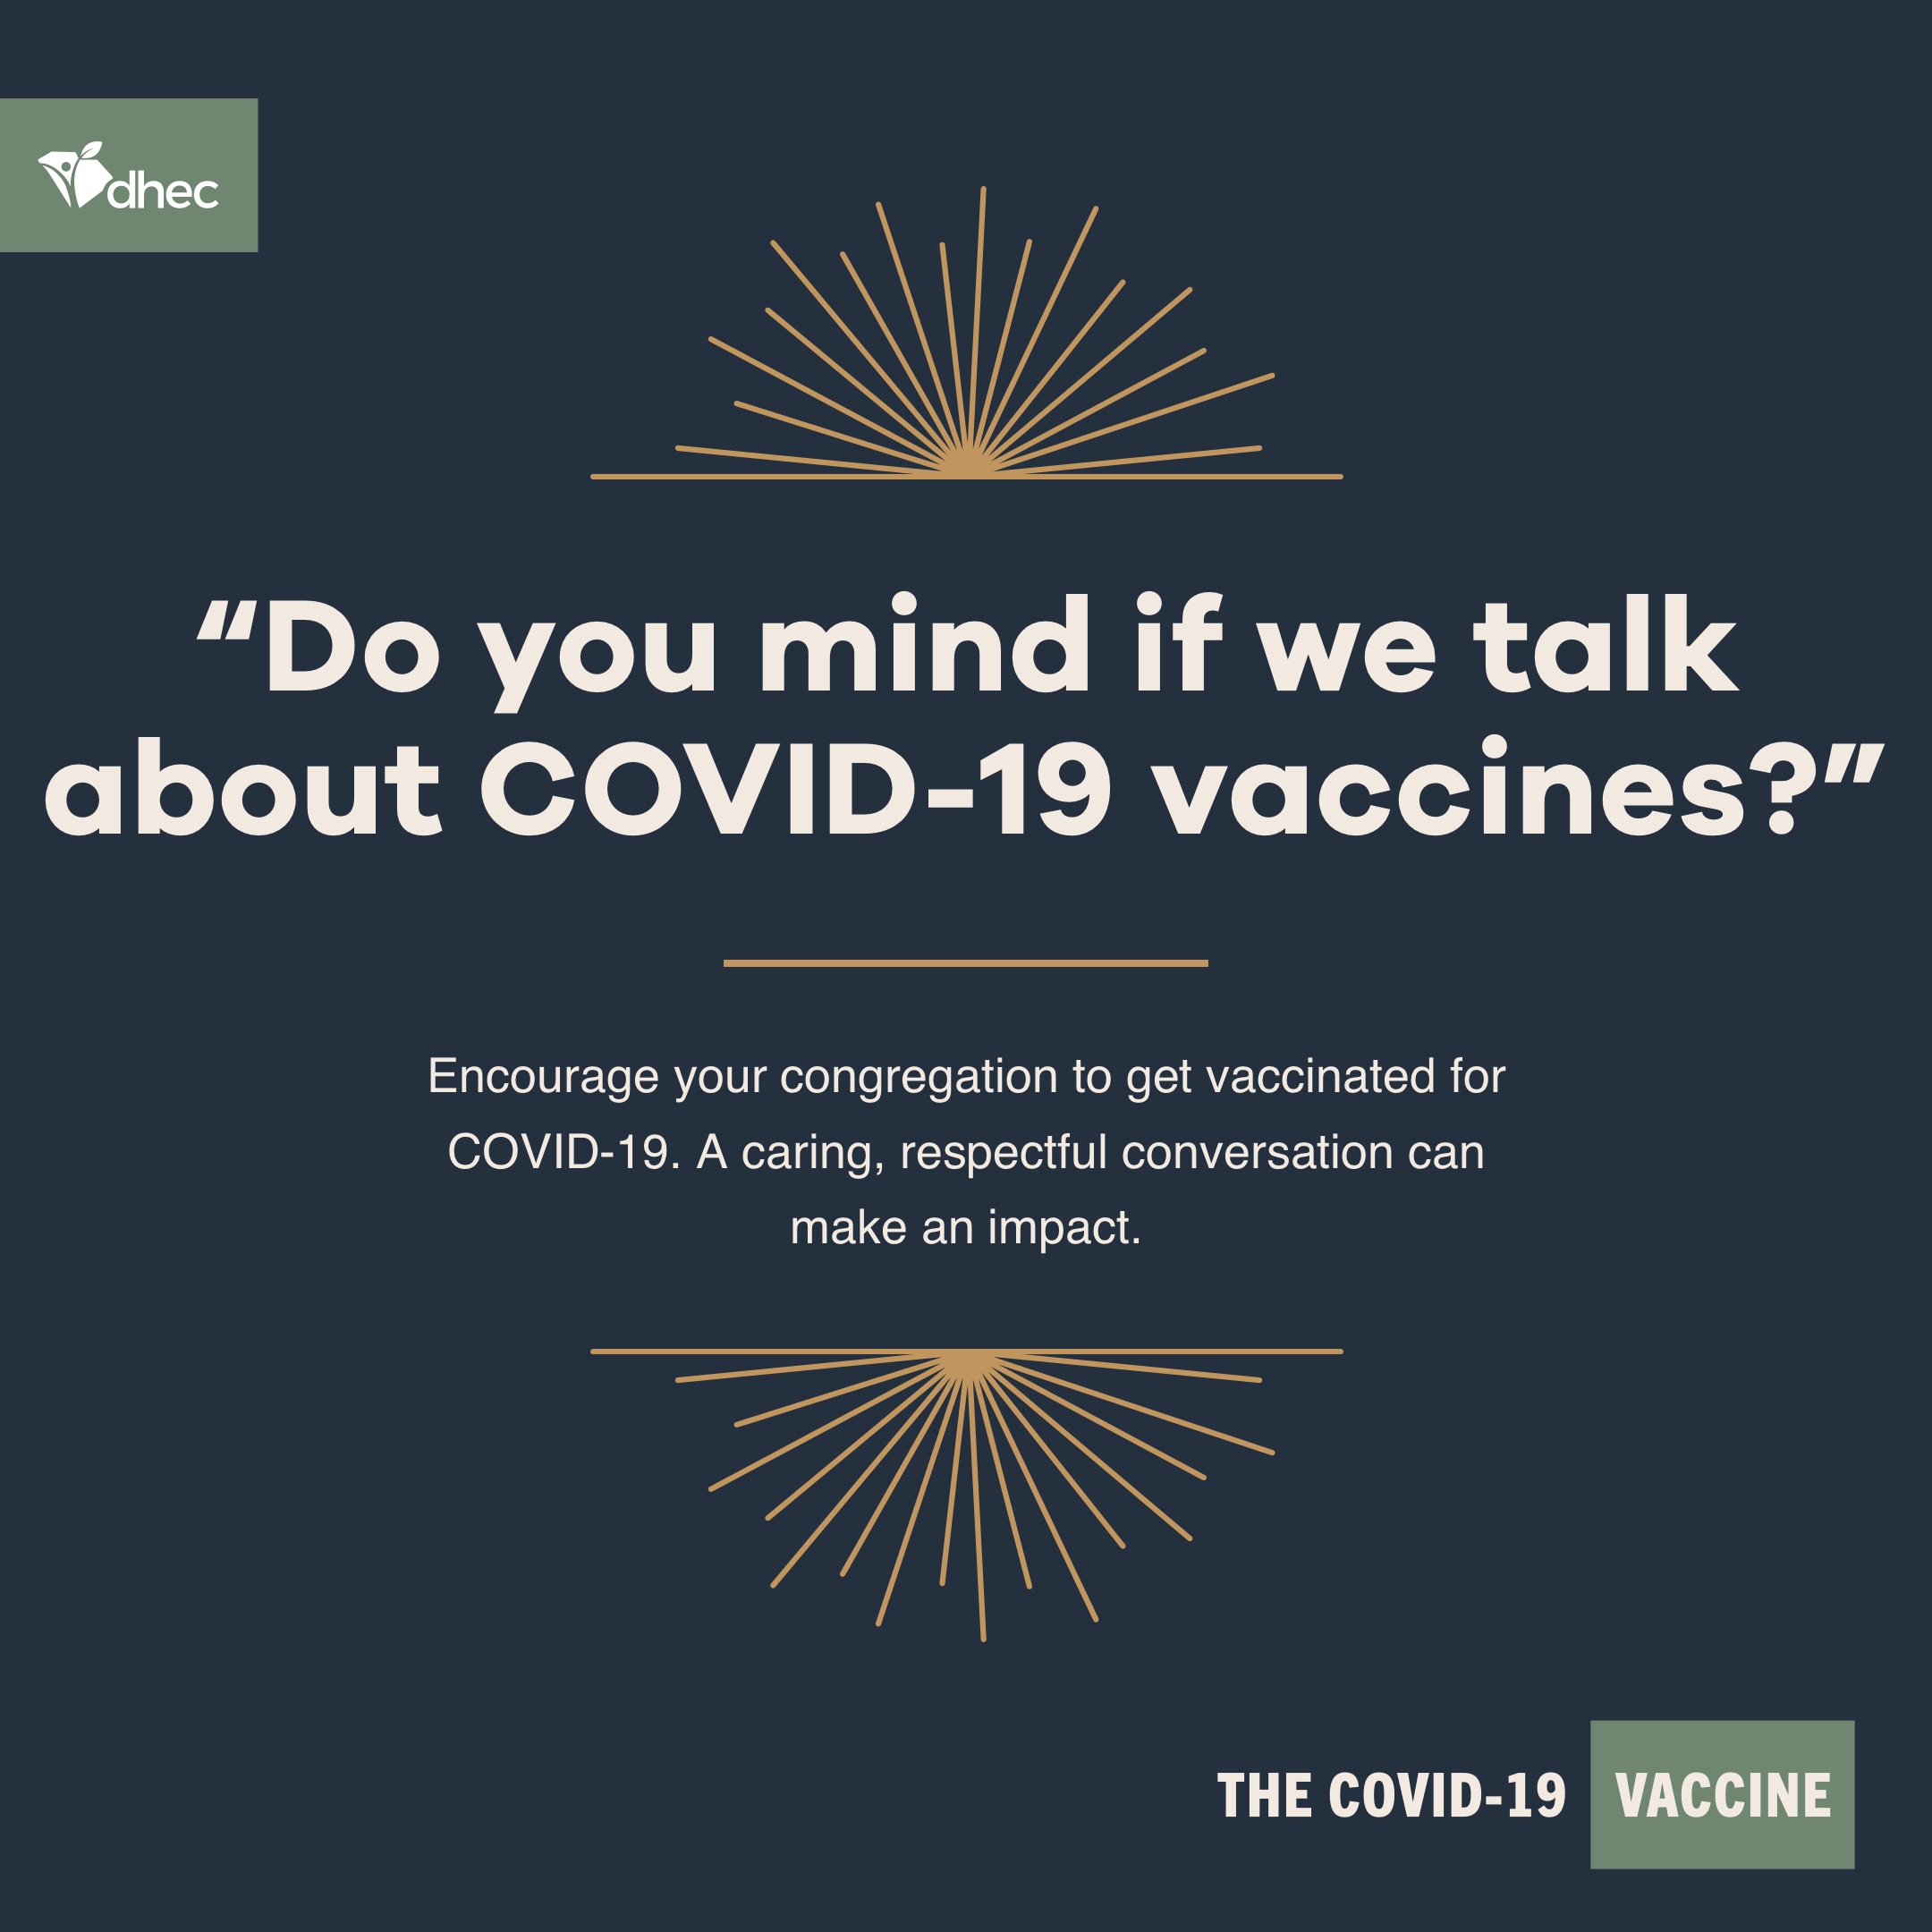 Do you mind if we talk about the COVID-19 vaccine?